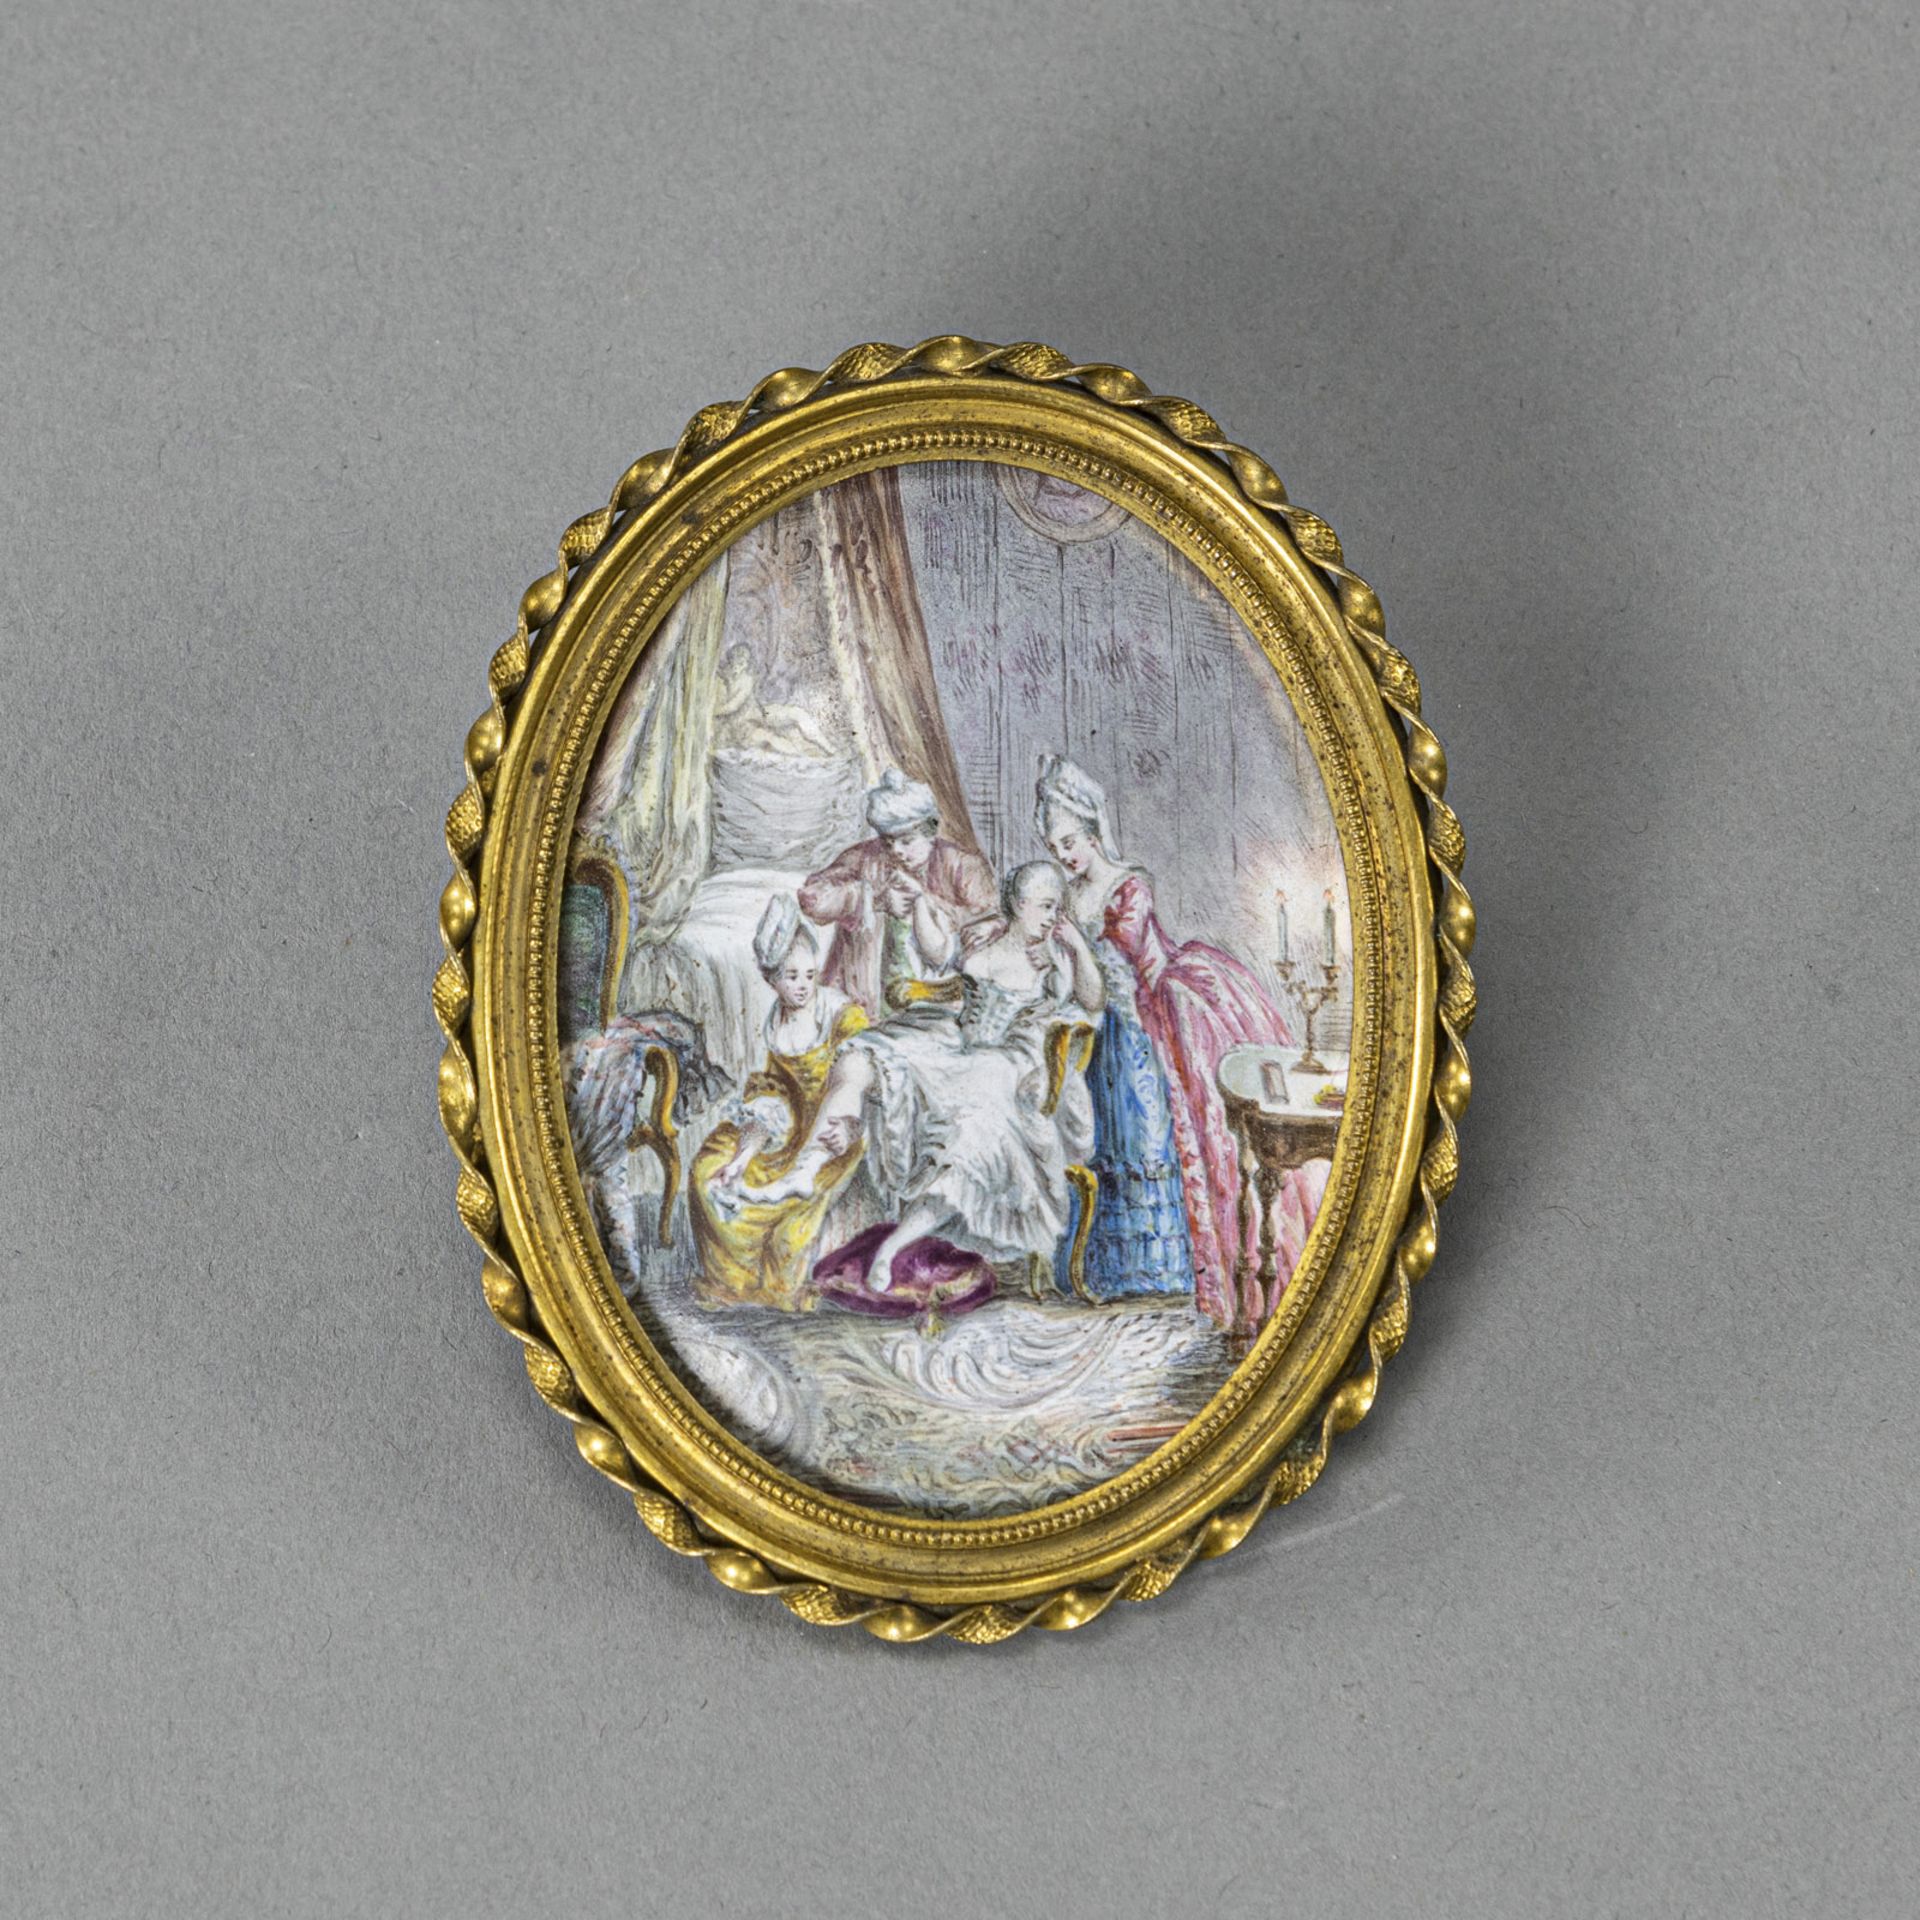 A MINIATURE PAINTING OF AN INTERIOR SCENE